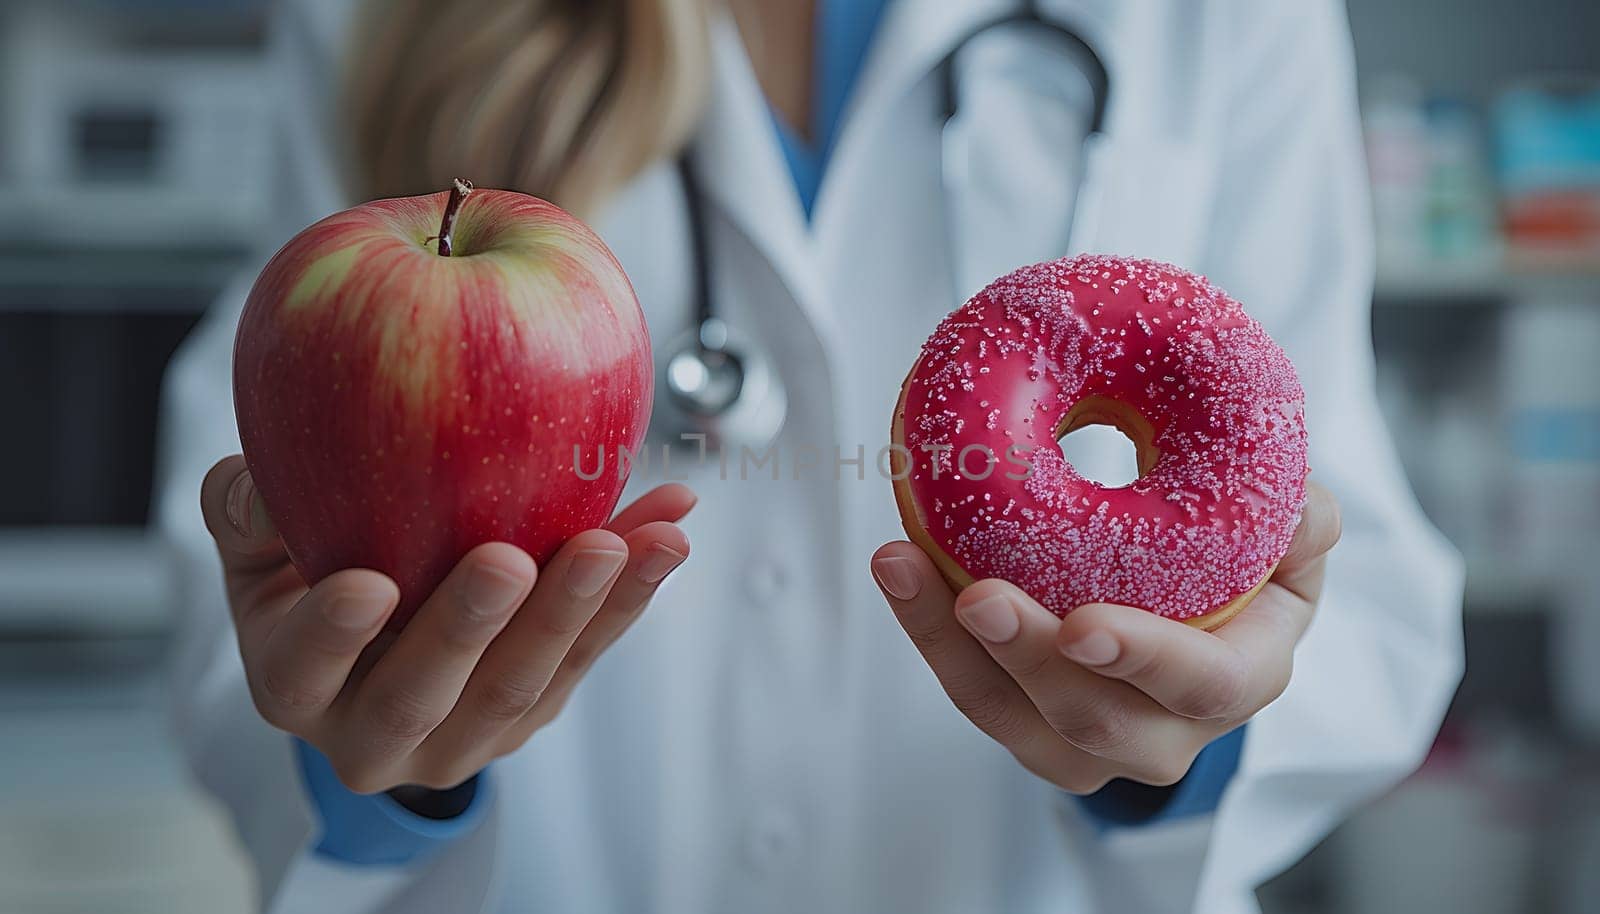 A doctor is holding a piece of natural food in each hand an apple, a staple food and superfood, and a donut, a processed food high in sugar and unhealthy fats